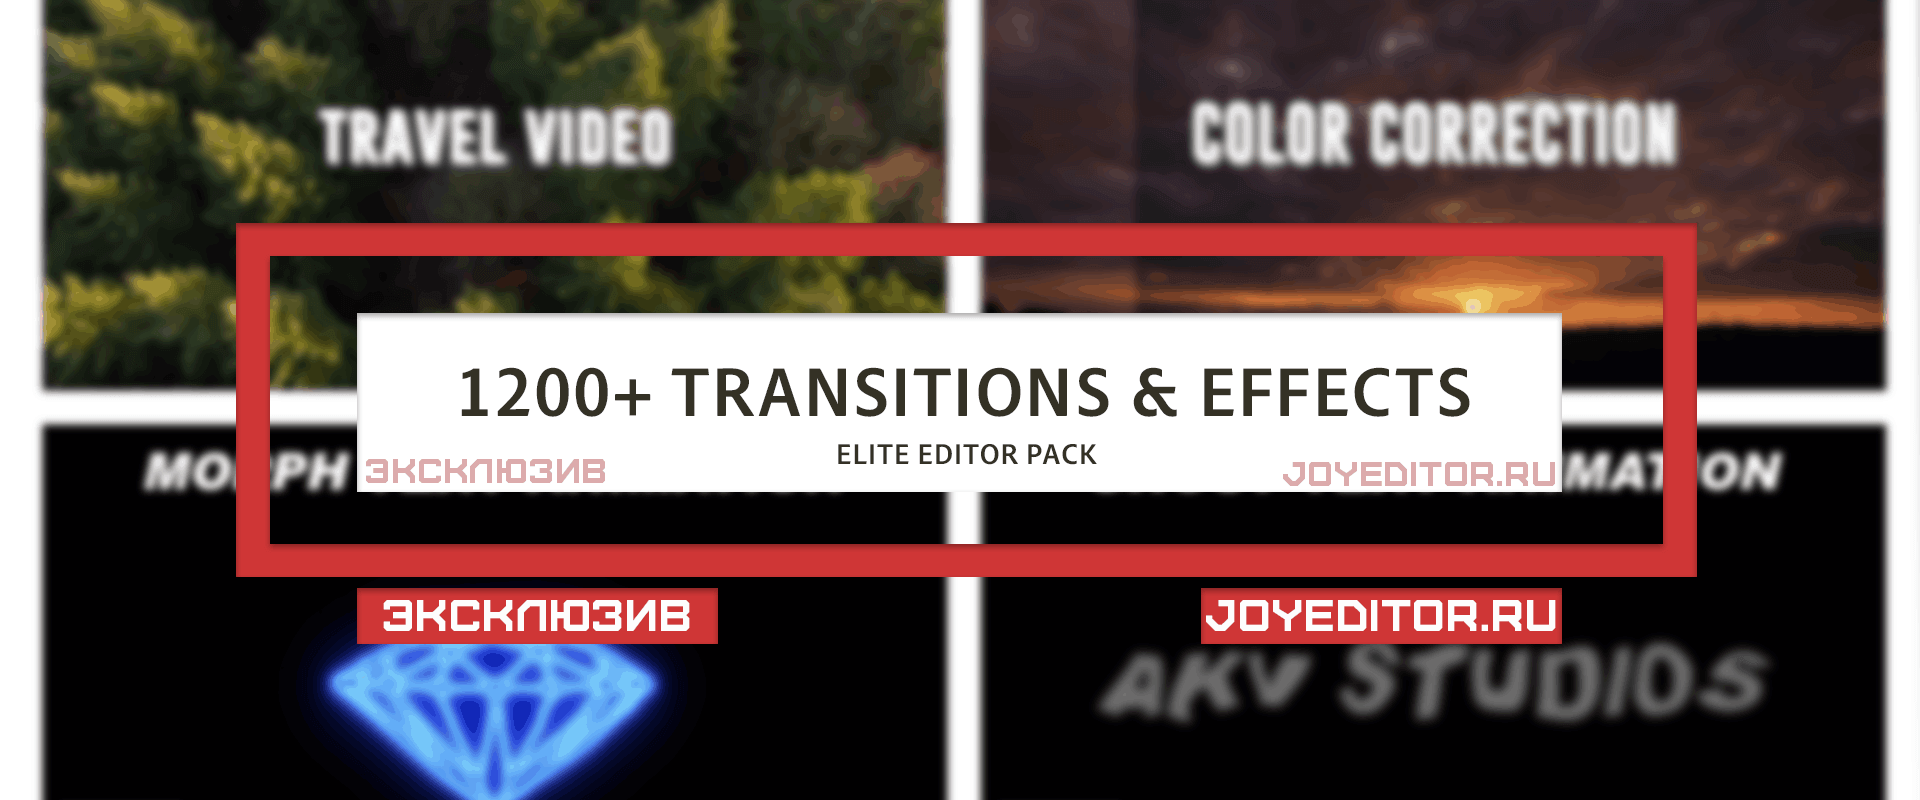 1200+ TRANSITIONS & EFFECTS - ELITE EDITOR PACK